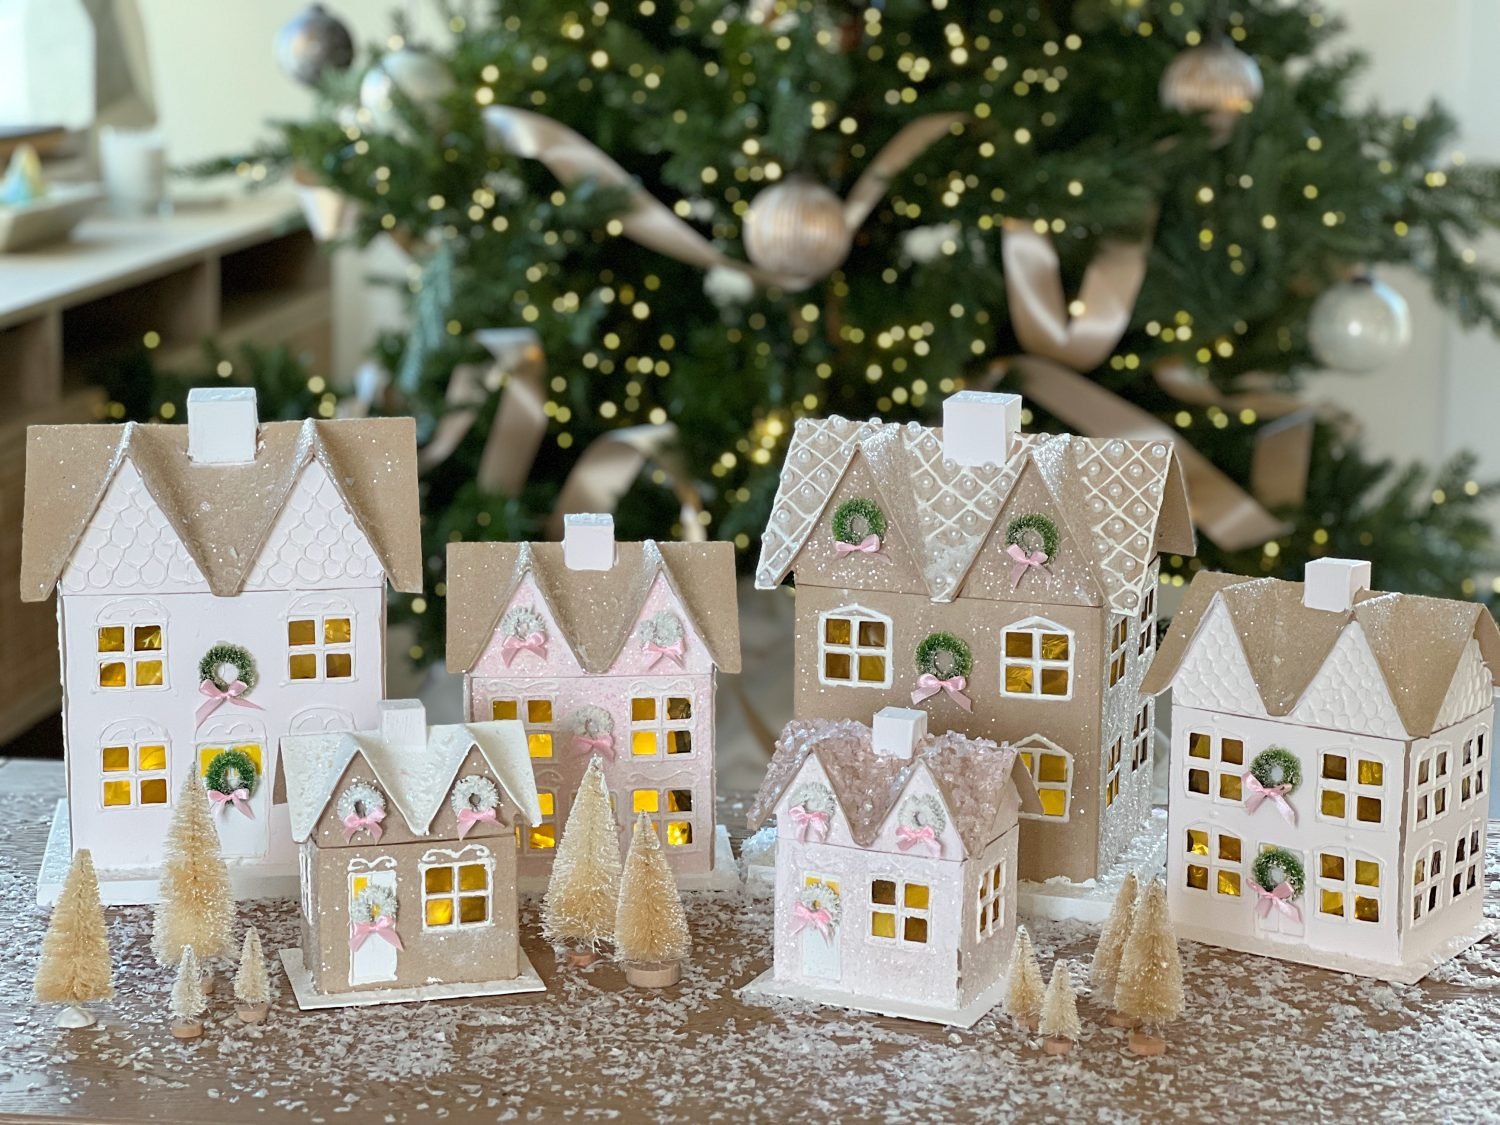 https://my100yearoldhome.com/wp-content/uploads/2023/11/The-Best-DIY-Christmas-Gingerbread-Houses-in-a-Village.jpg